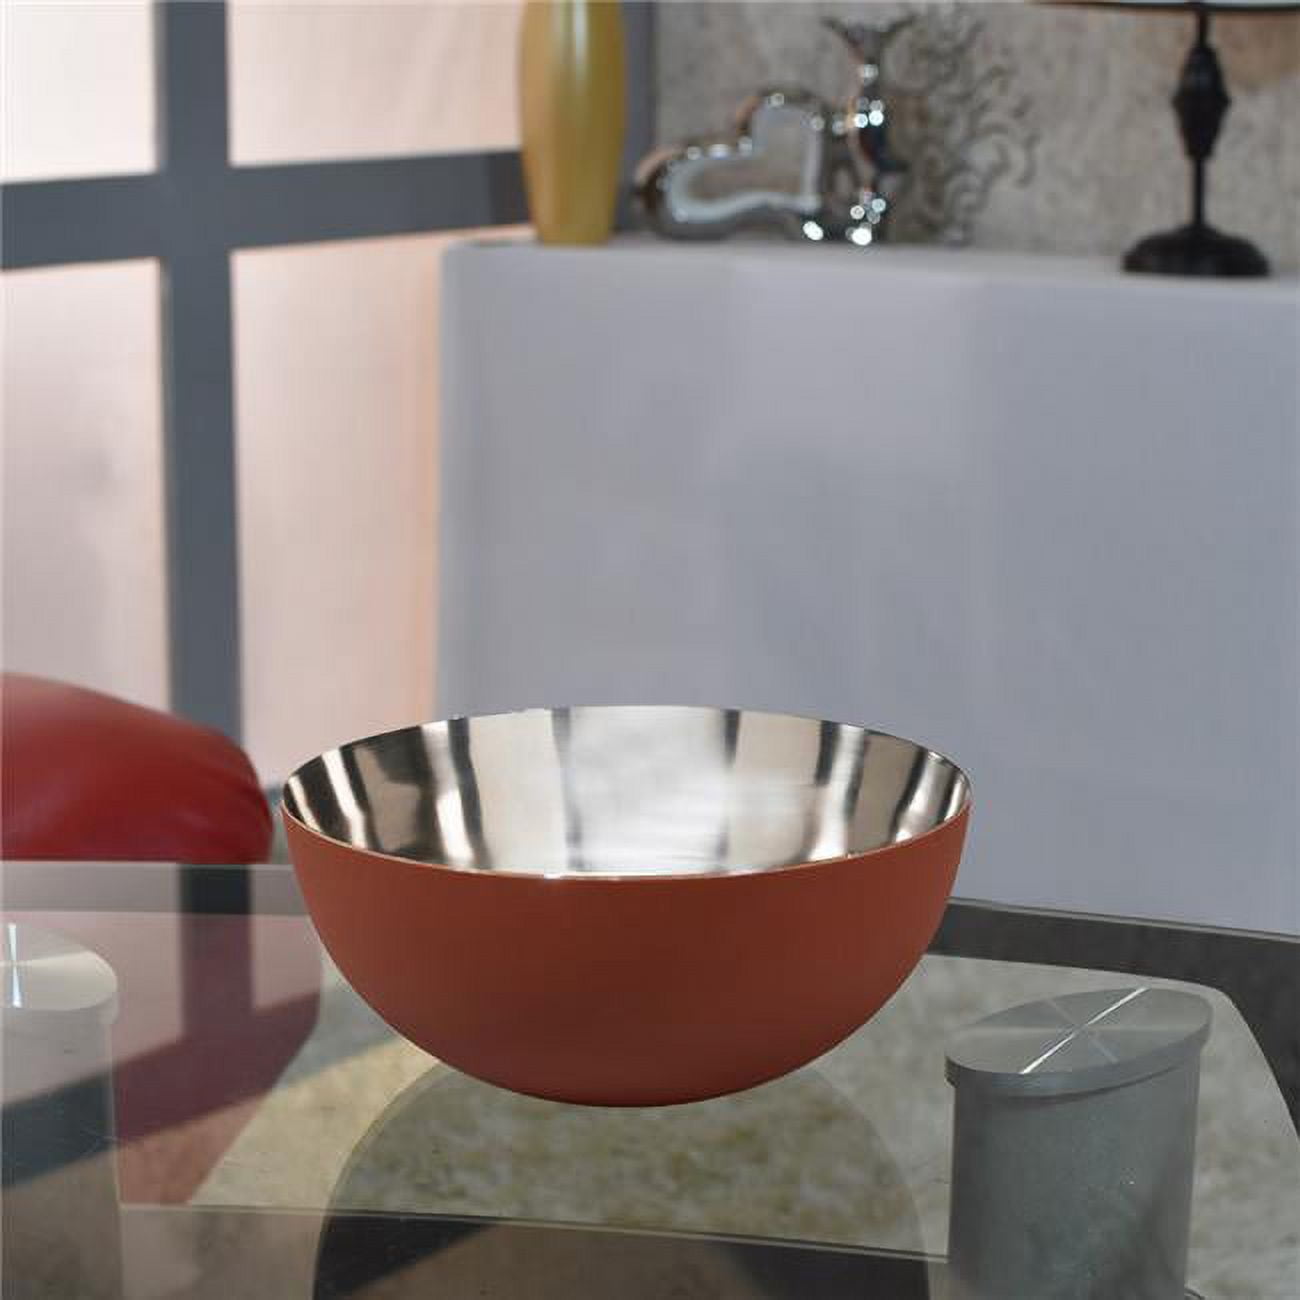 Picture of BBH Homes UBBBAOB328CSC1HS 19 x 19 x 8.5 cm Handmade Decorative Stainless Steel Bowls, Orange Rust